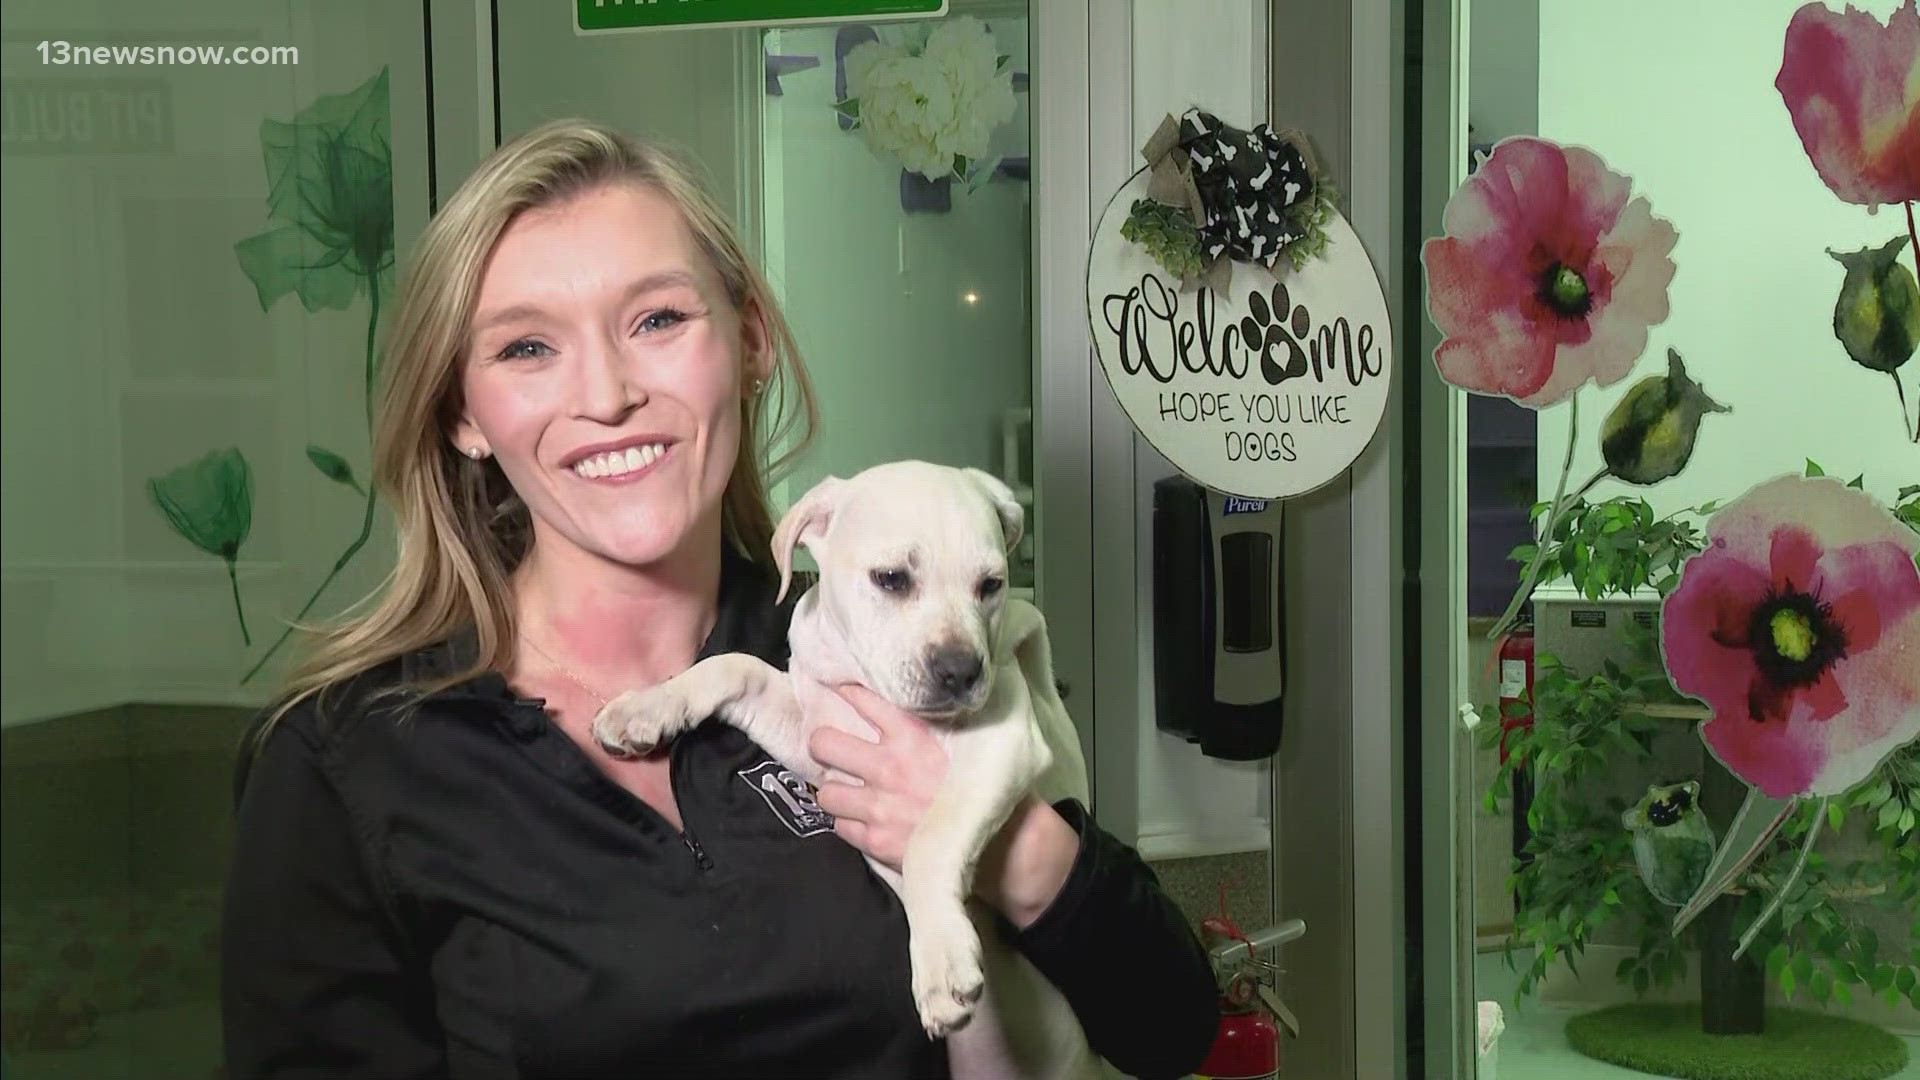 13News Now and Espirit Decor Home Furnishings are raising $25,000 for Hope for Life Rescue, a Virginia Beach nonprofit that transforms the lives of dogs and cats.